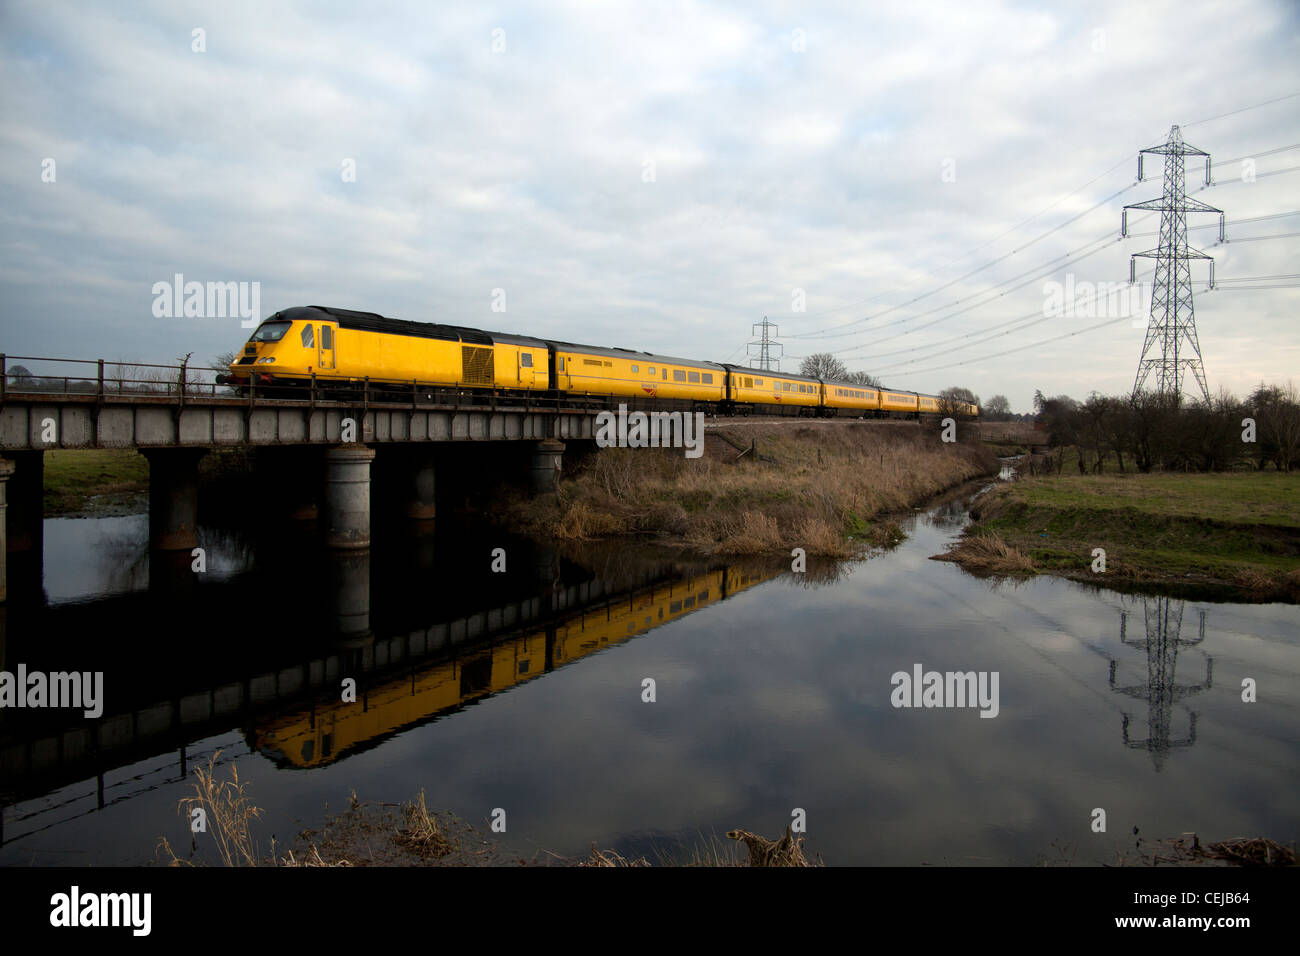 Network Rail New Measurement High Speed train (HST) crossing and reflecting in the River Soar, Normanton on Soar, Loughborough. Stock Photo